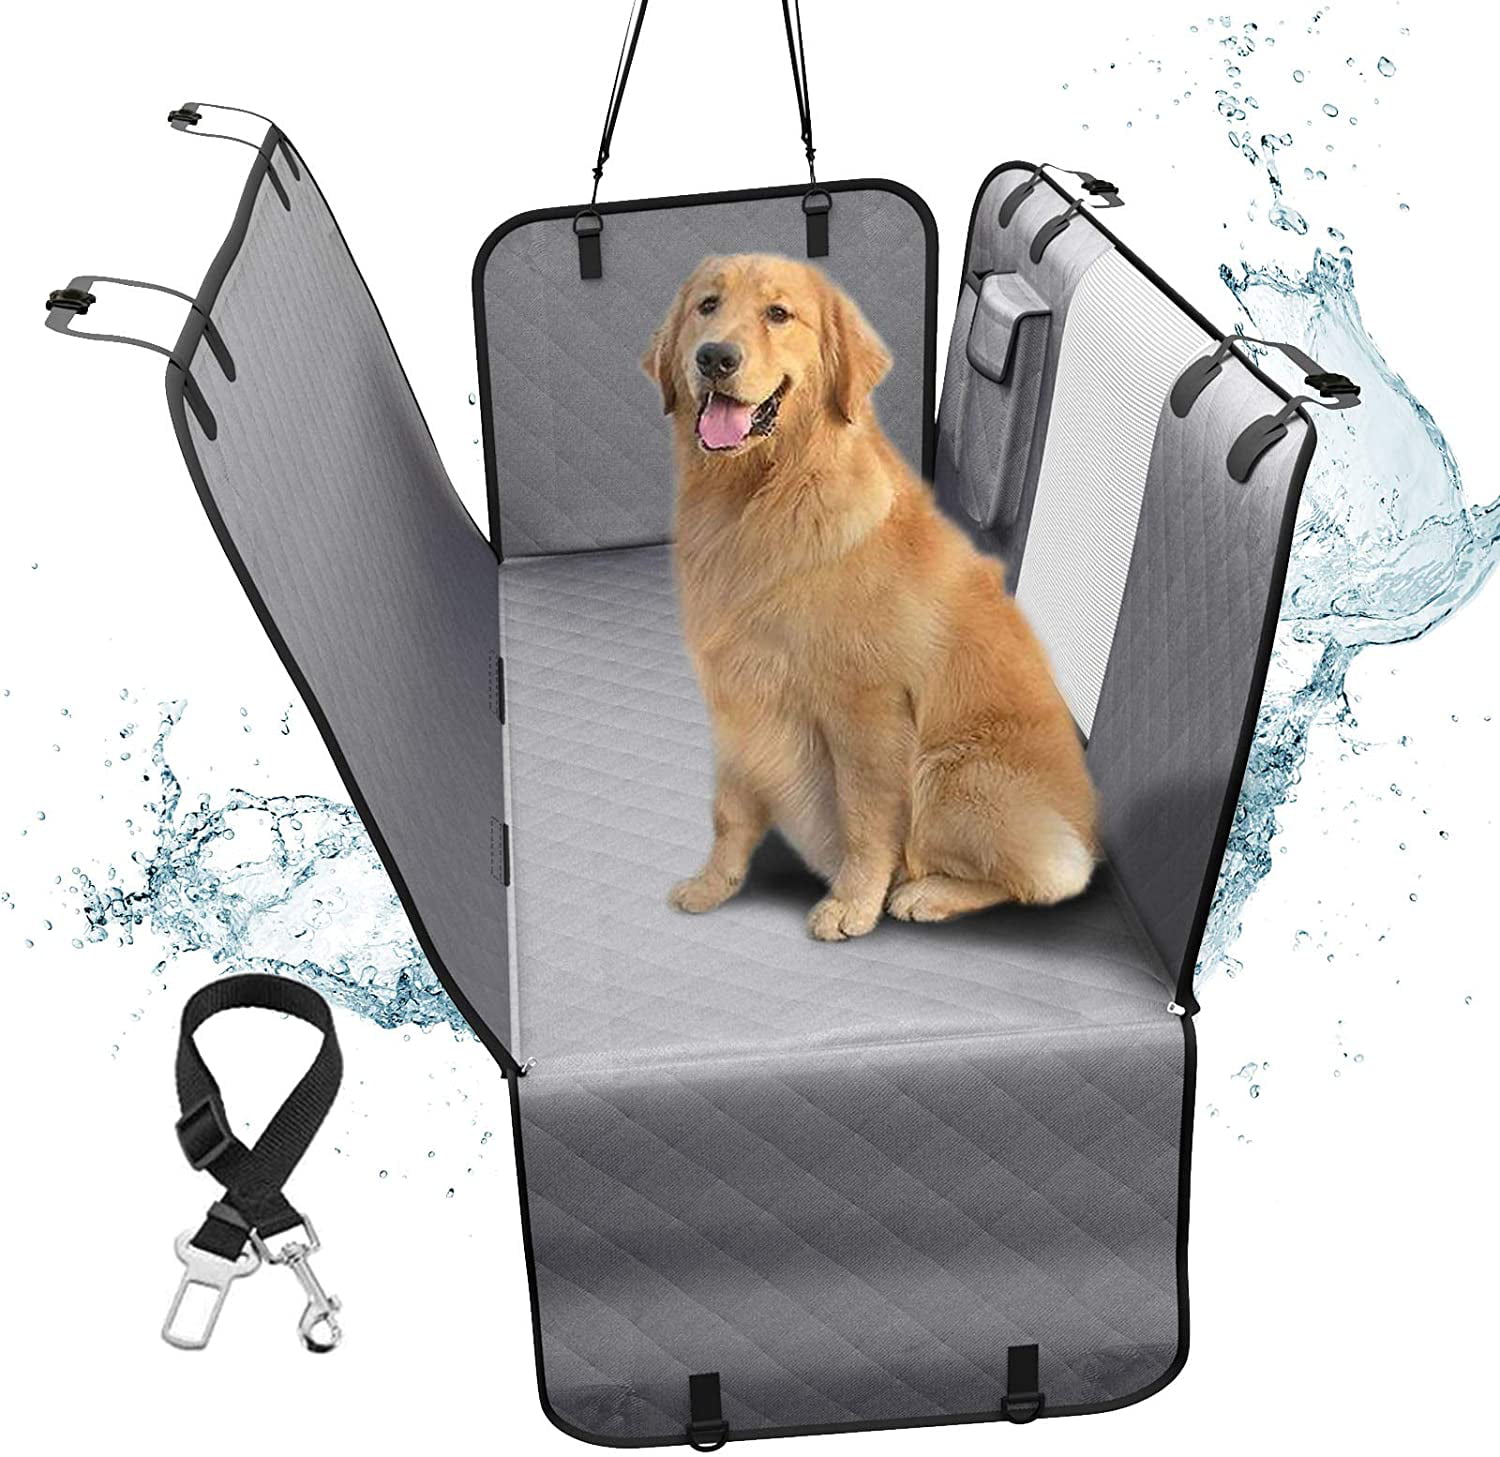 Dog Car Seat Covers with Mesh Visual Window Waterproof Scratchproof Non-Slip Dog Hammock for Back Seat with 2 Storage Pockets Pet Car Seat Cover for Cars Trucks and SUVs 